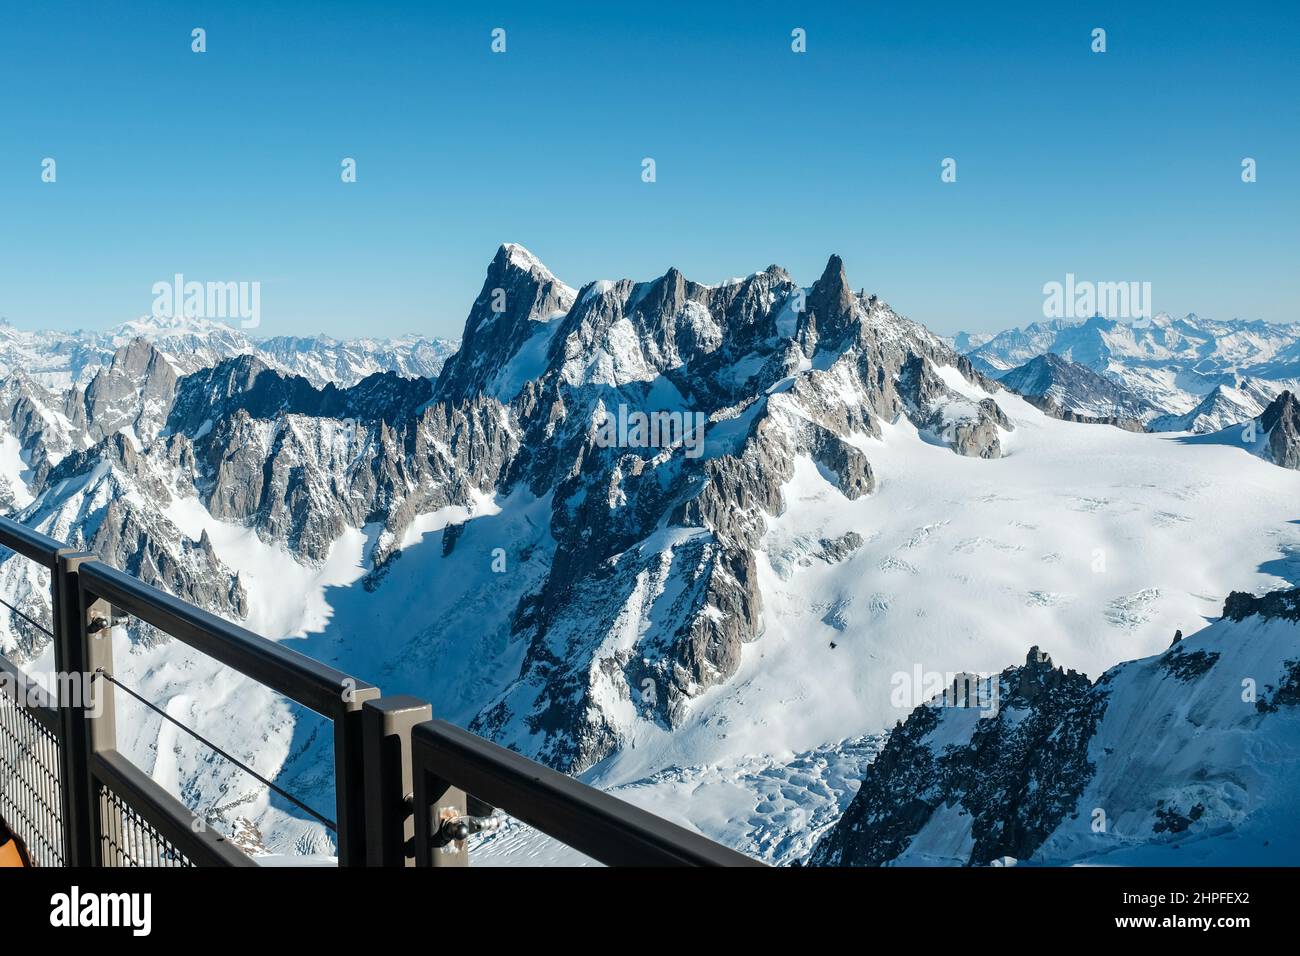 Vallee Blanche and mountains (Grandes Jorasses, etc) as seen from Aiguille du Midi, Chamonix, France Stock Photo